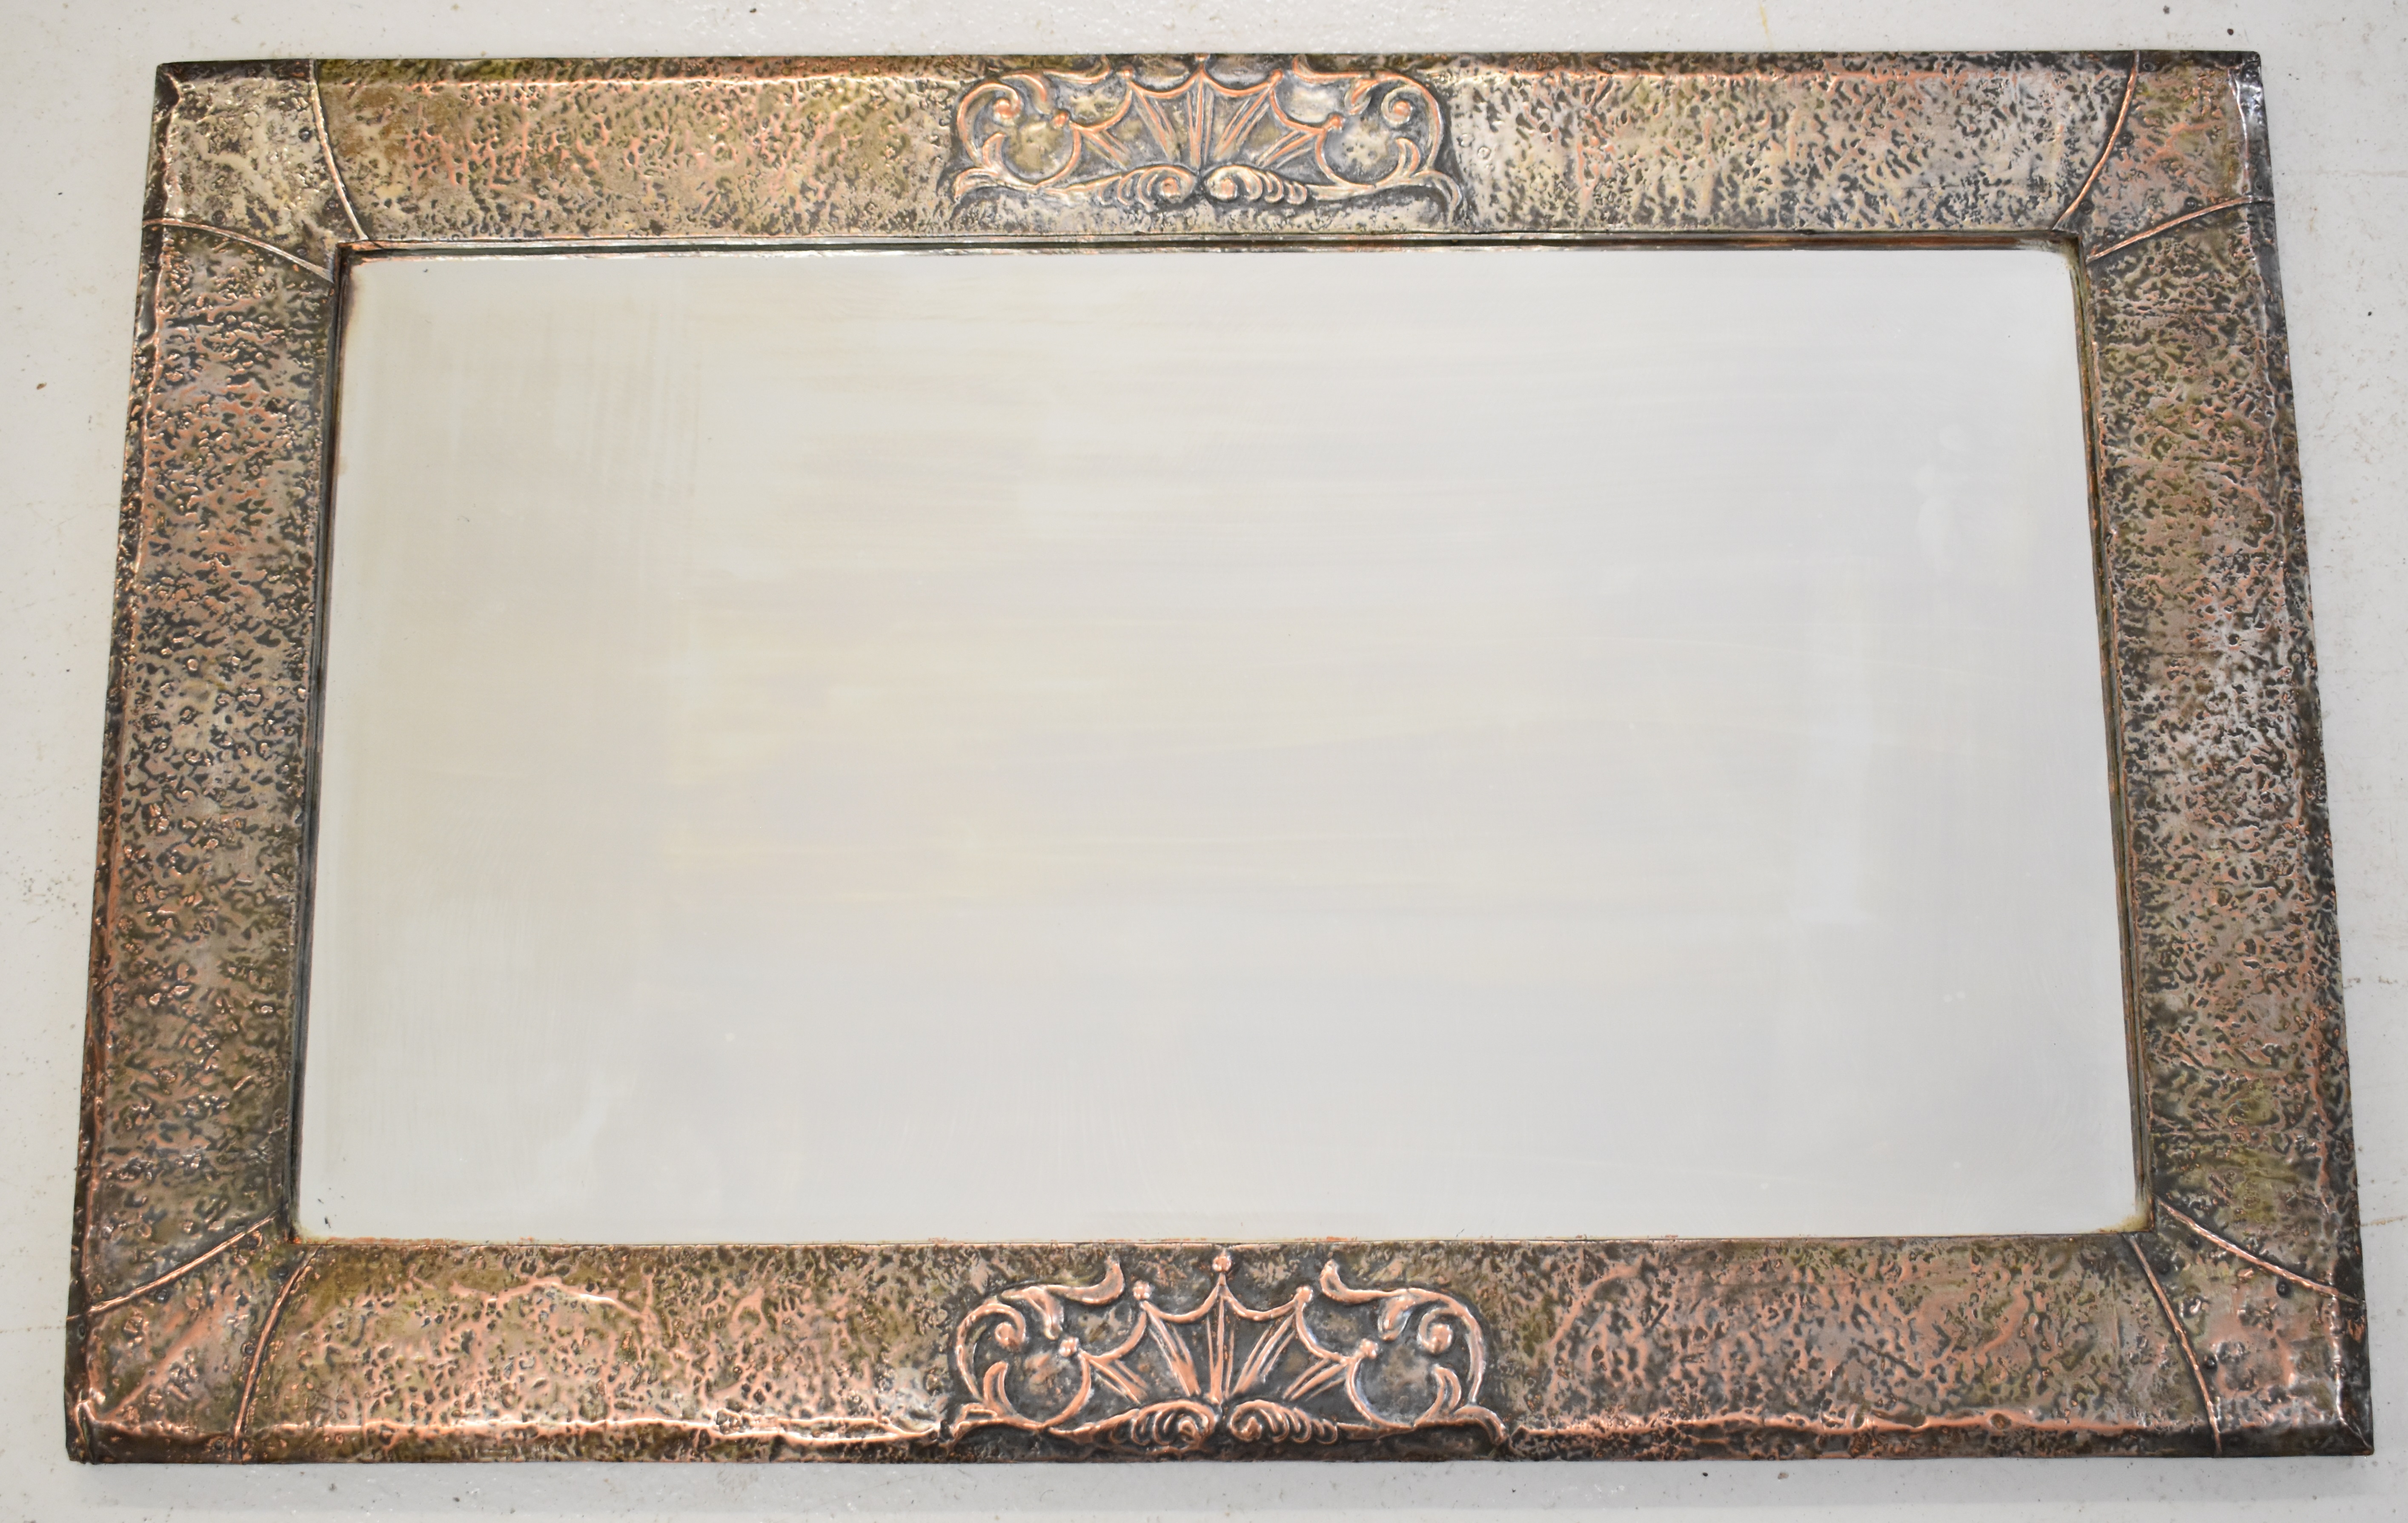 Arts & Crafts copper framed mirror with hammered and relief moulded decoration and bevelled glass